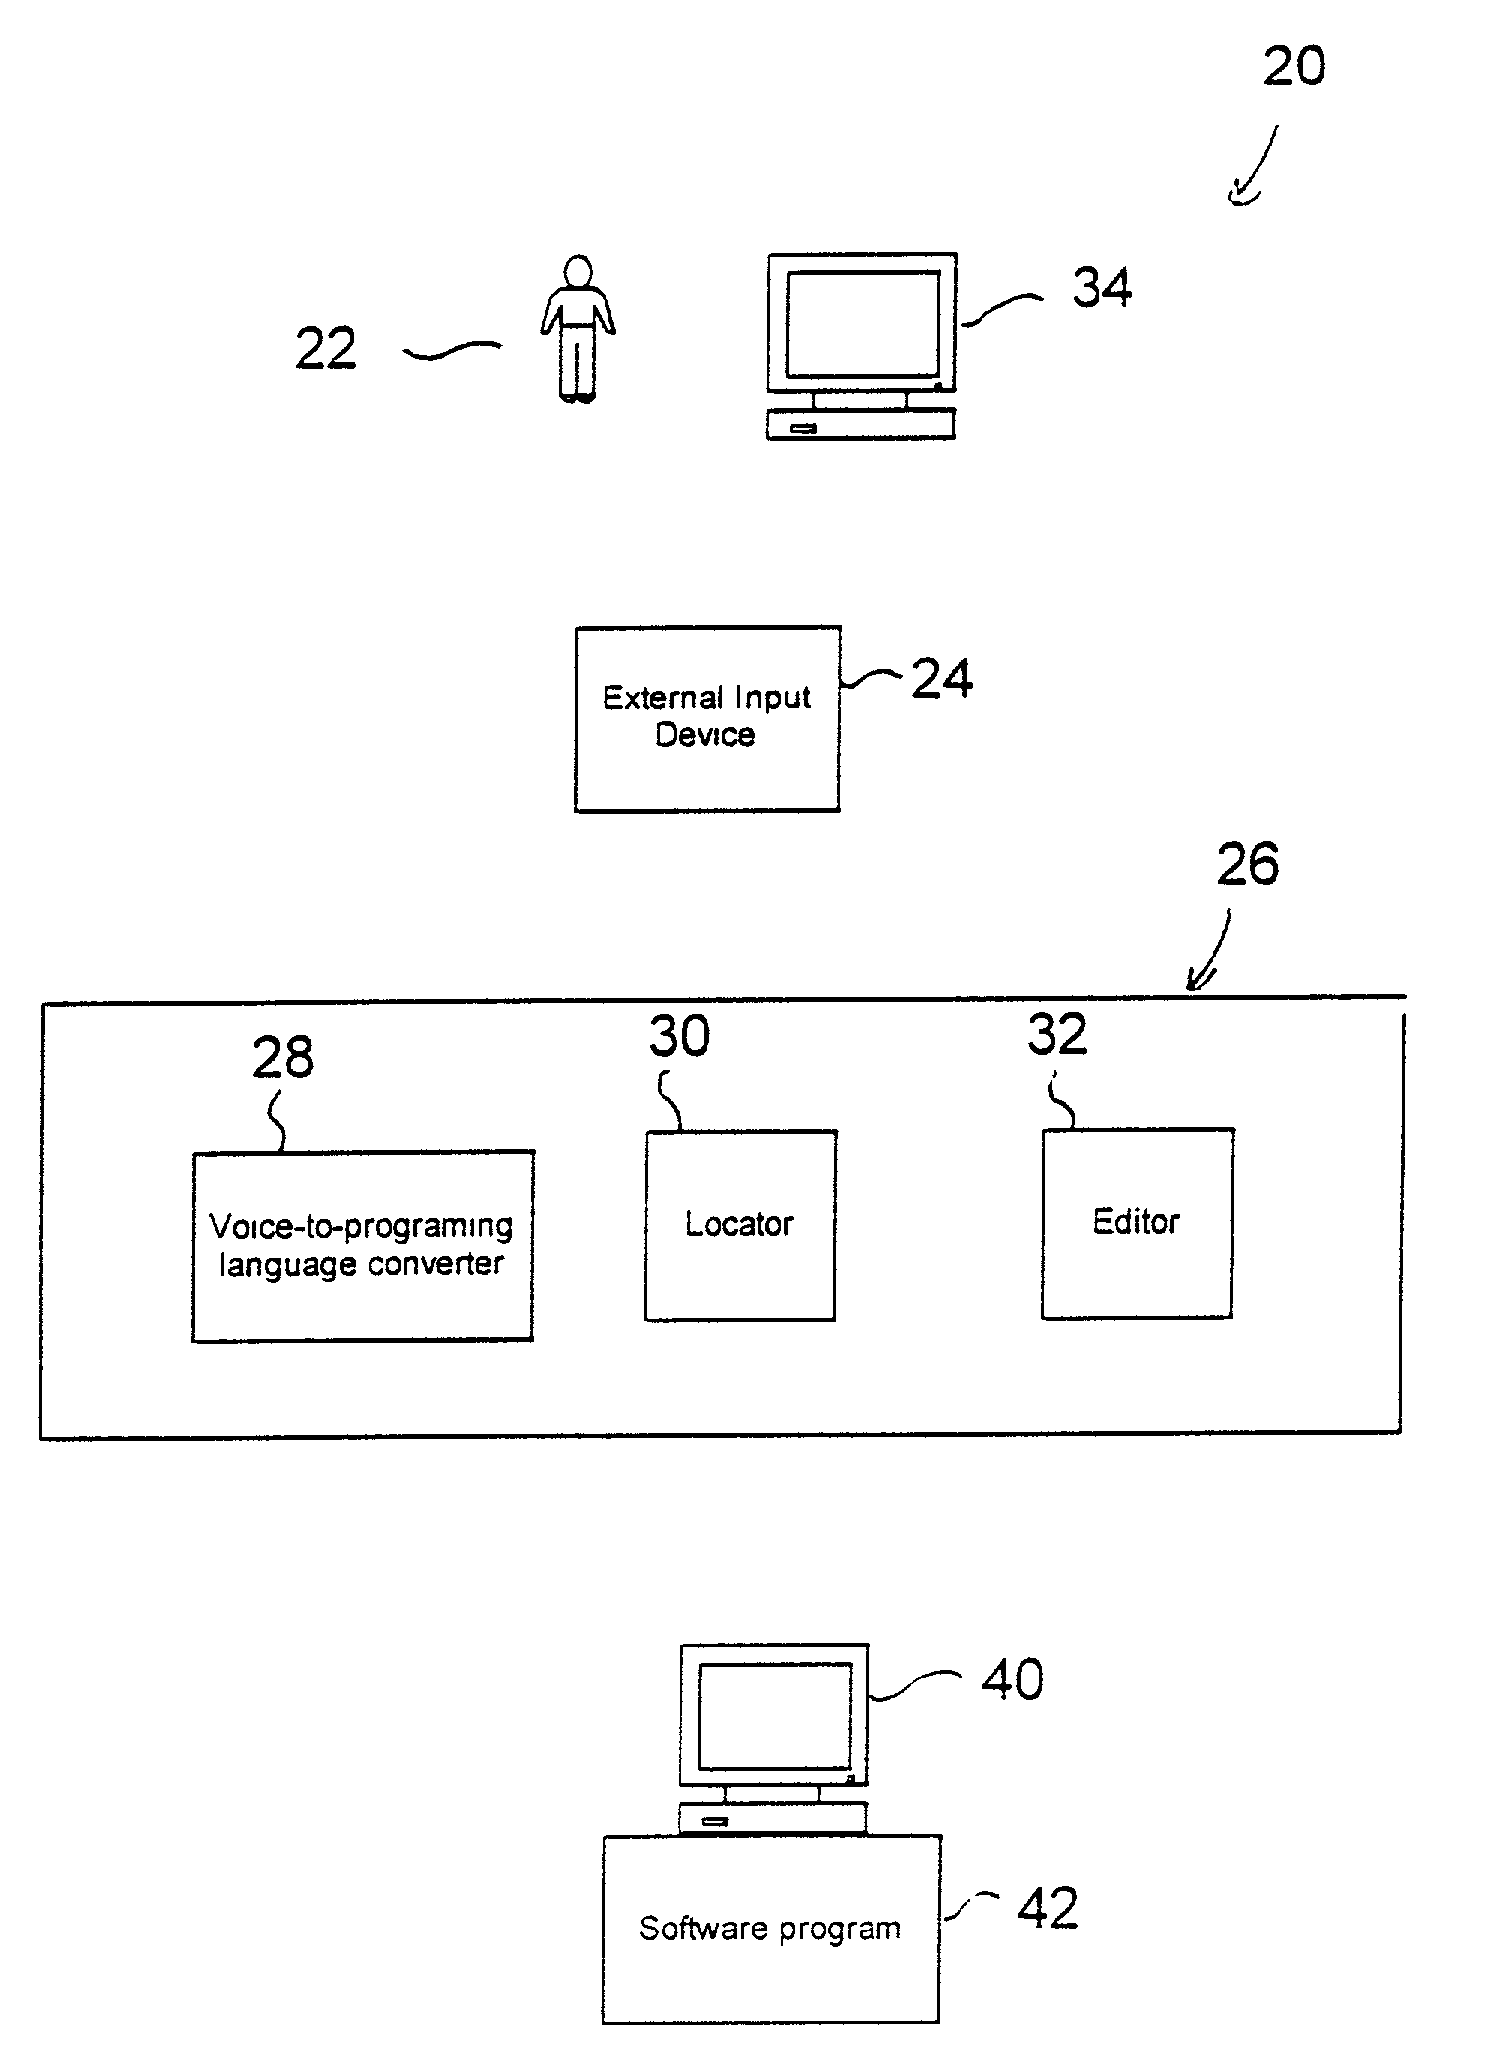 System and method for dynamically changing software programs by voice commands